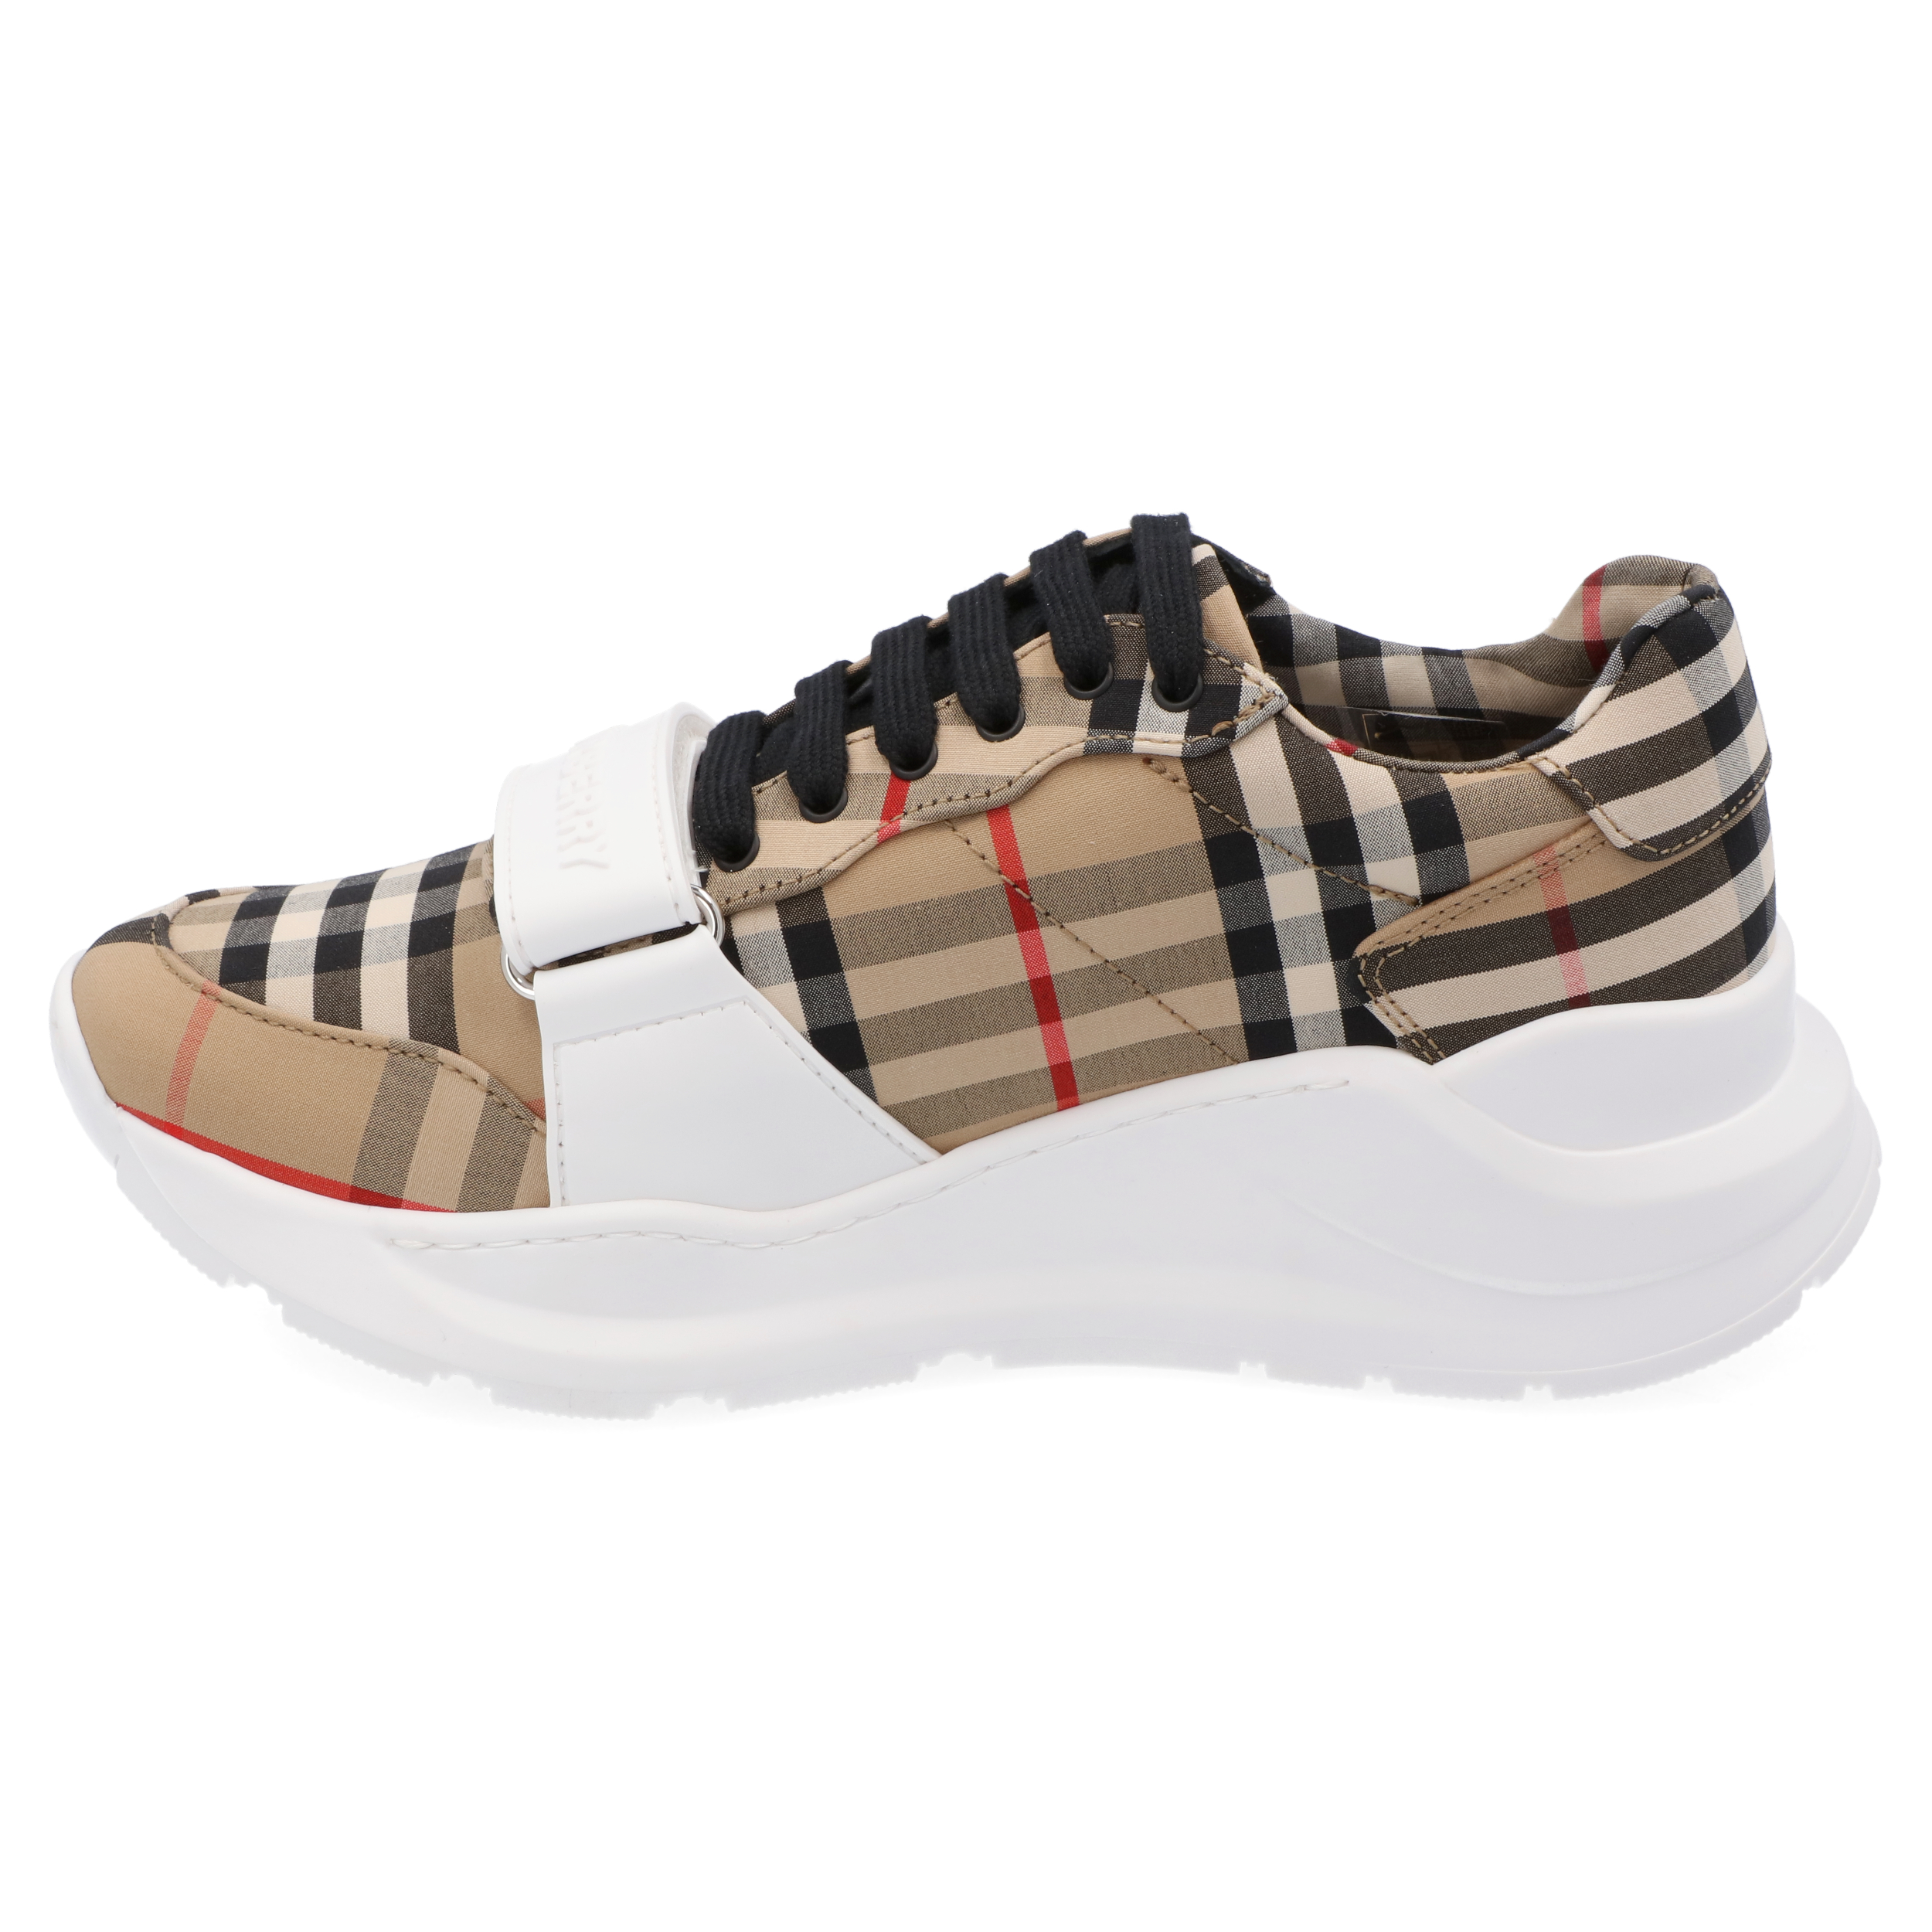 BurberryBurberry Check Canvas Regis Chunky Sneakers Size EU 44.5 ...